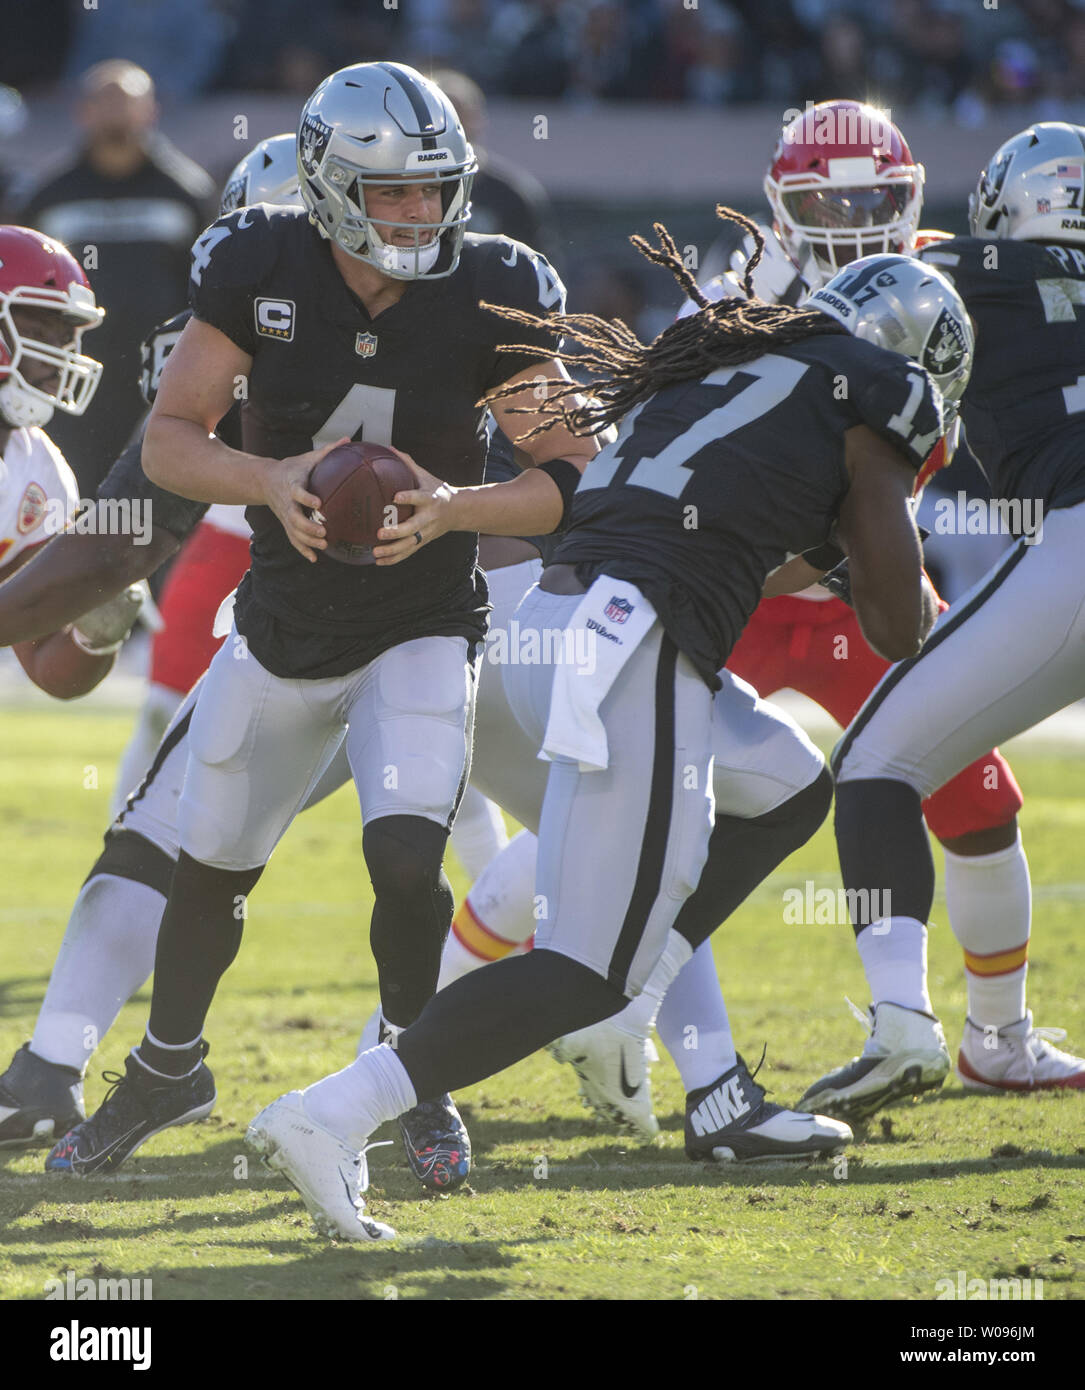 Oakland Raiders QB Derek Carr stands in the pocket against the Kansas City Chiefs in the second quarter at the Coliseum in Oakland, California on December 2, 2018. The Chiefs defeated the Raiders 40-33.    Photo by Terry Schmitt/UPI Stock Photo